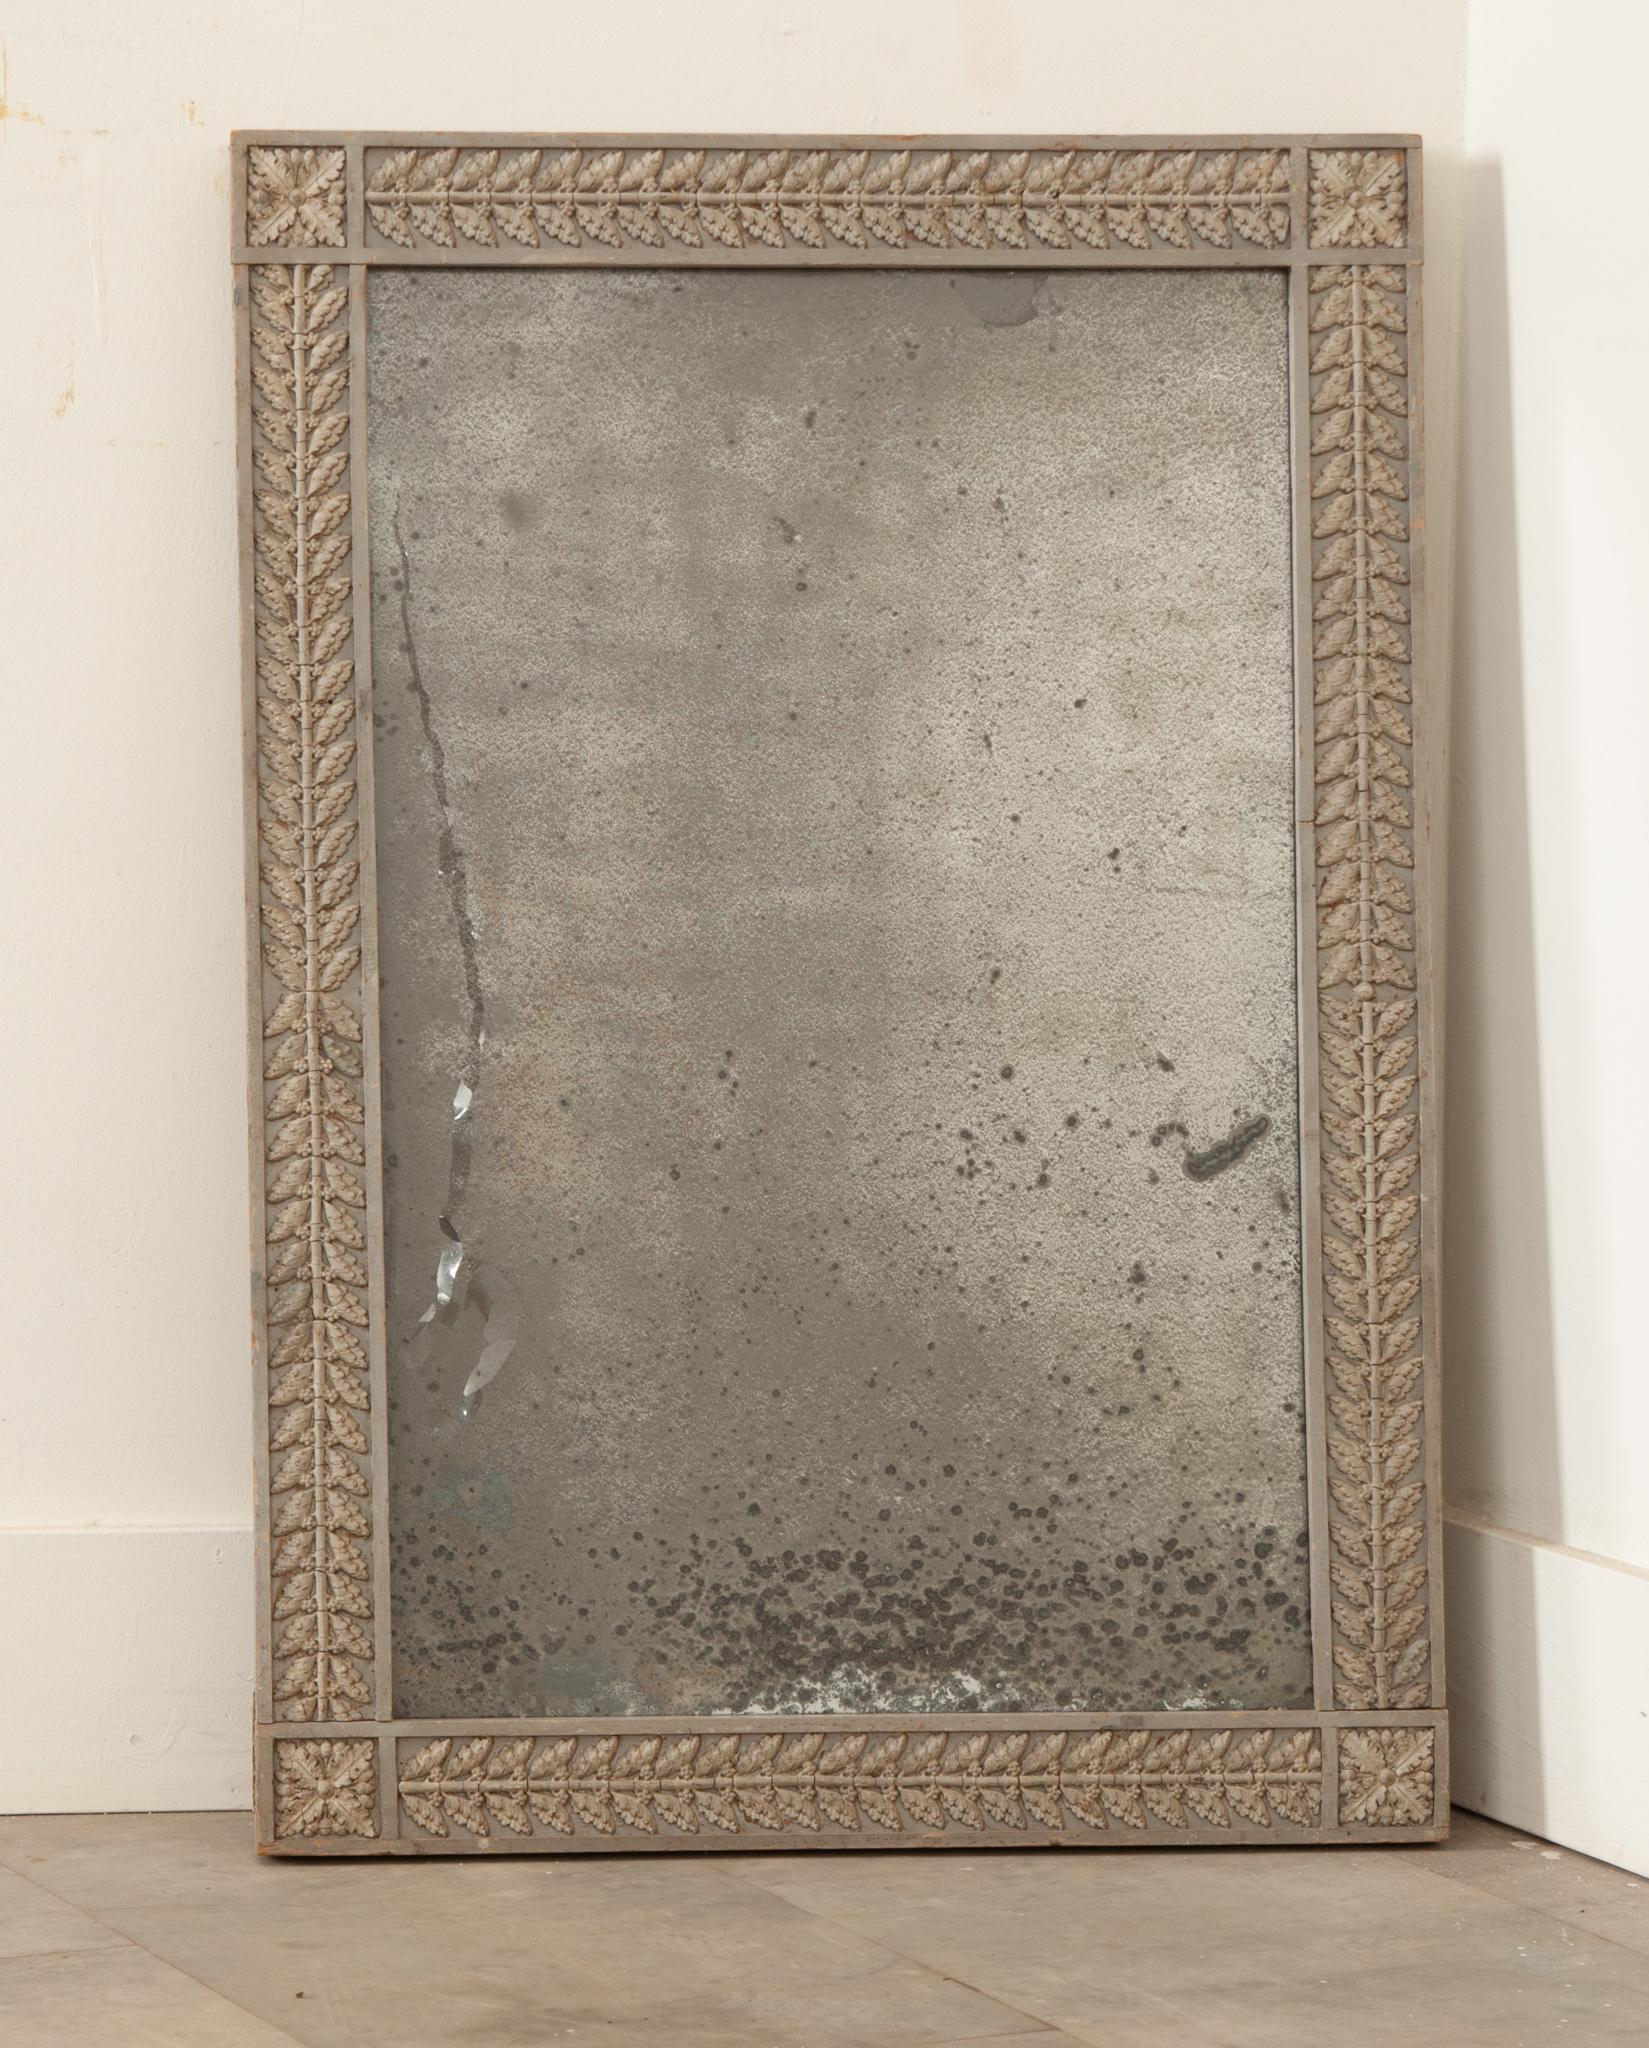 A French 19th century antique mirror in a hand-carved and painted frame with its original highly foxed mirror plate that shimmers with diamond dust. Hand-crafted in France circa 1850, this mirror features a thick, symmetrical rectangular shaped